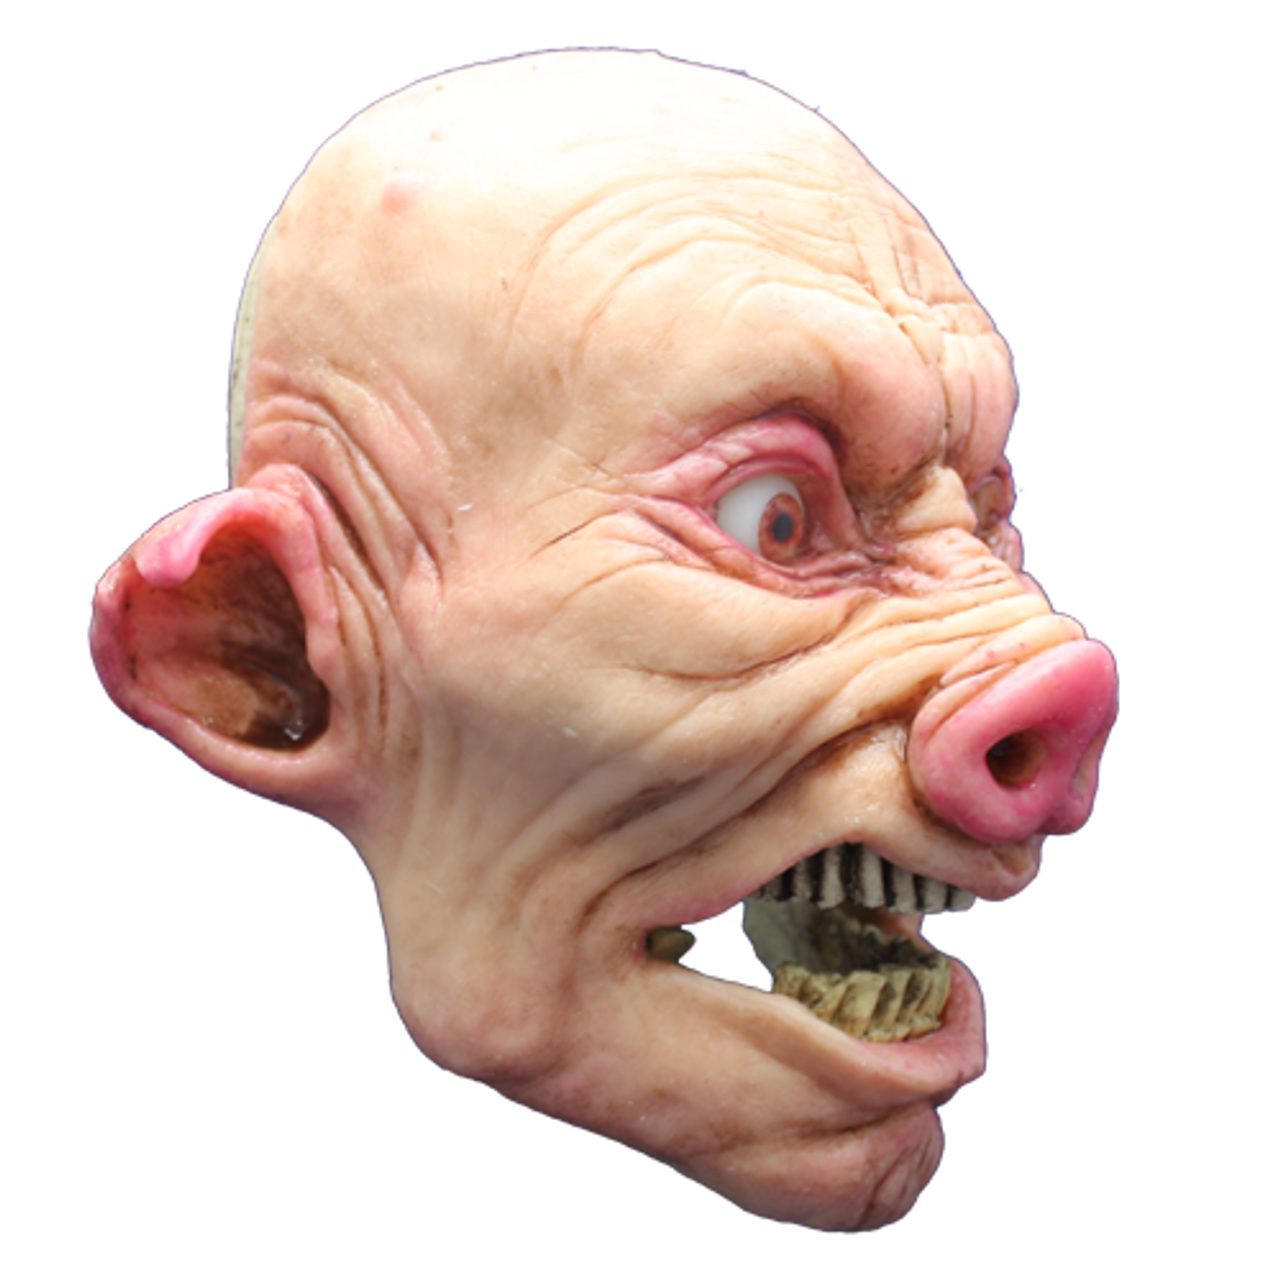 Silicone pig mask